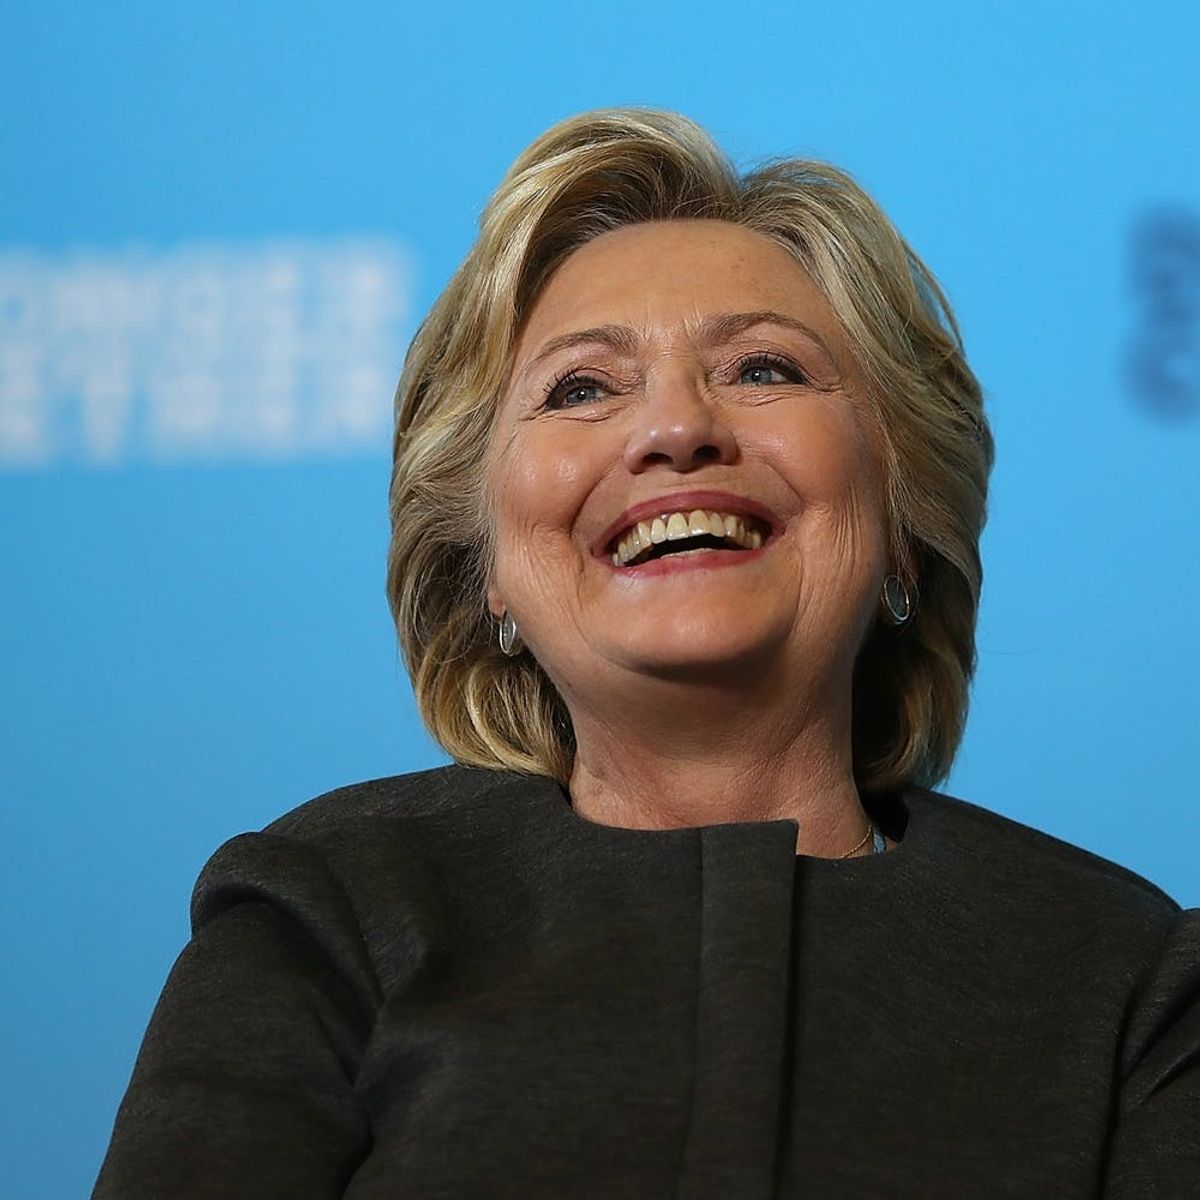 The Hillary Shimmy Song Will Stay in Your Head All Day (Sorry Not Sorry)